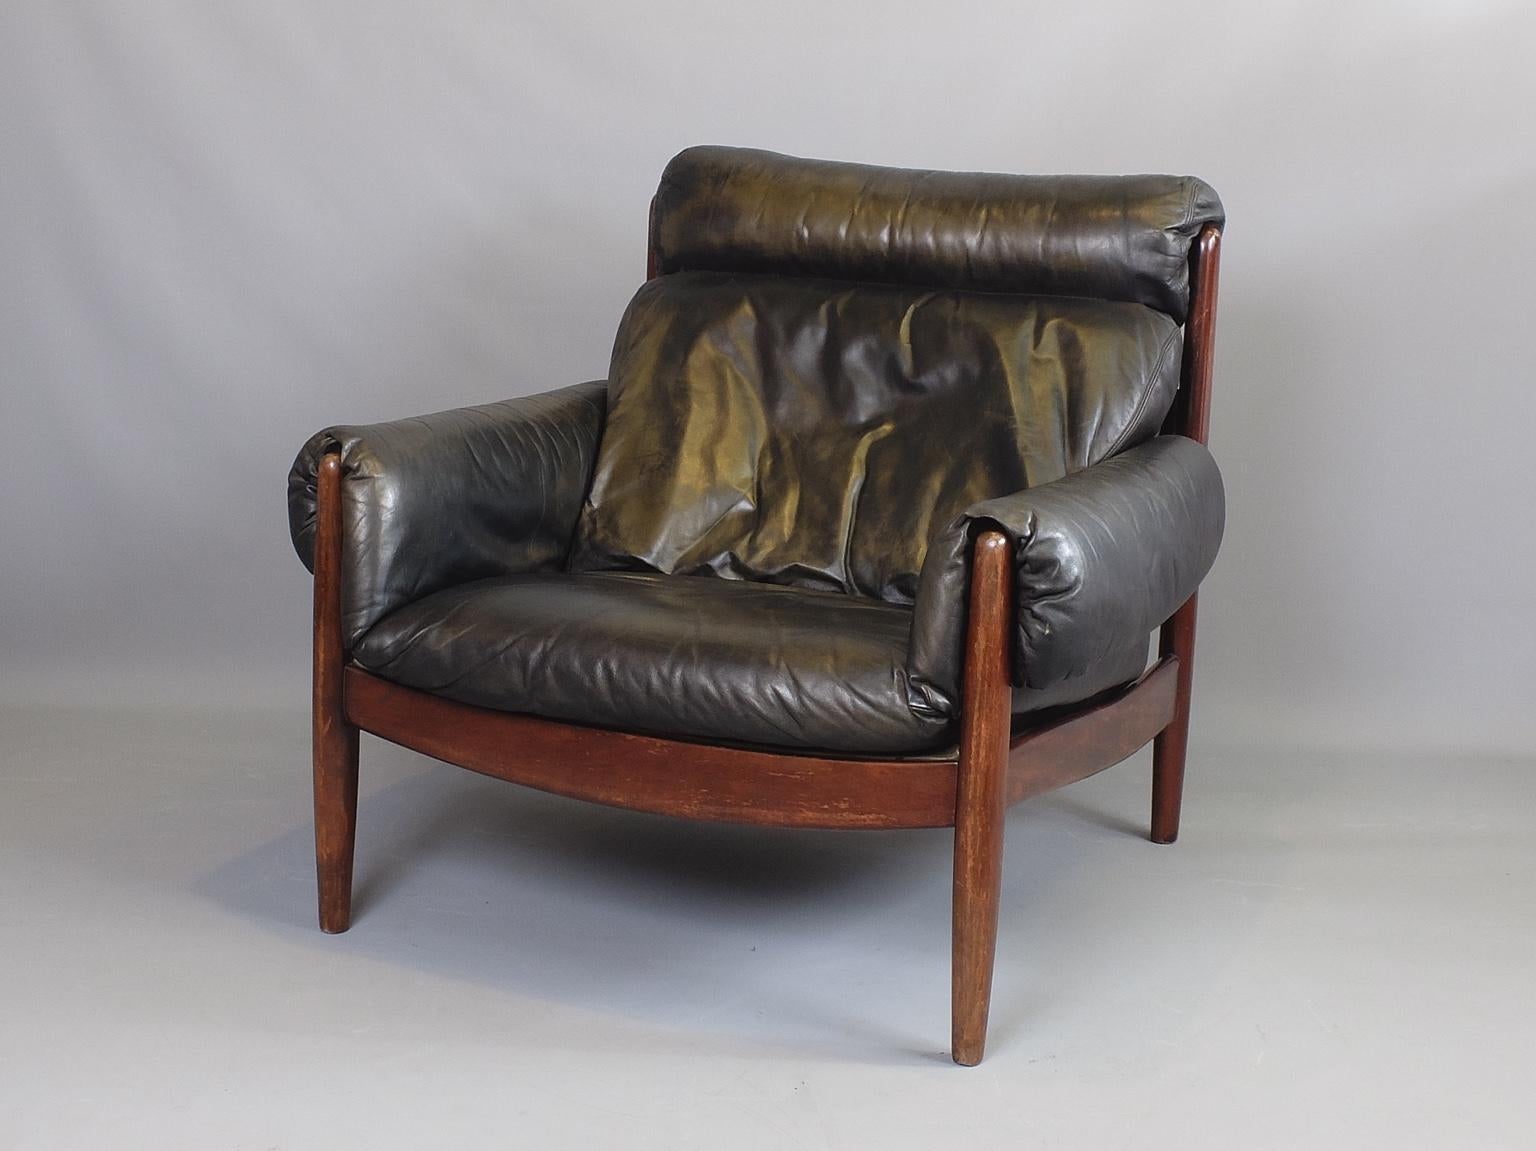 A midcentury mahogany framed armchair with original leather upholstery produced in Brazil, circa 1960. The chair is a generous size and very comfortable. The leather has a very attractive patina with signs of fading in places but is not worn or